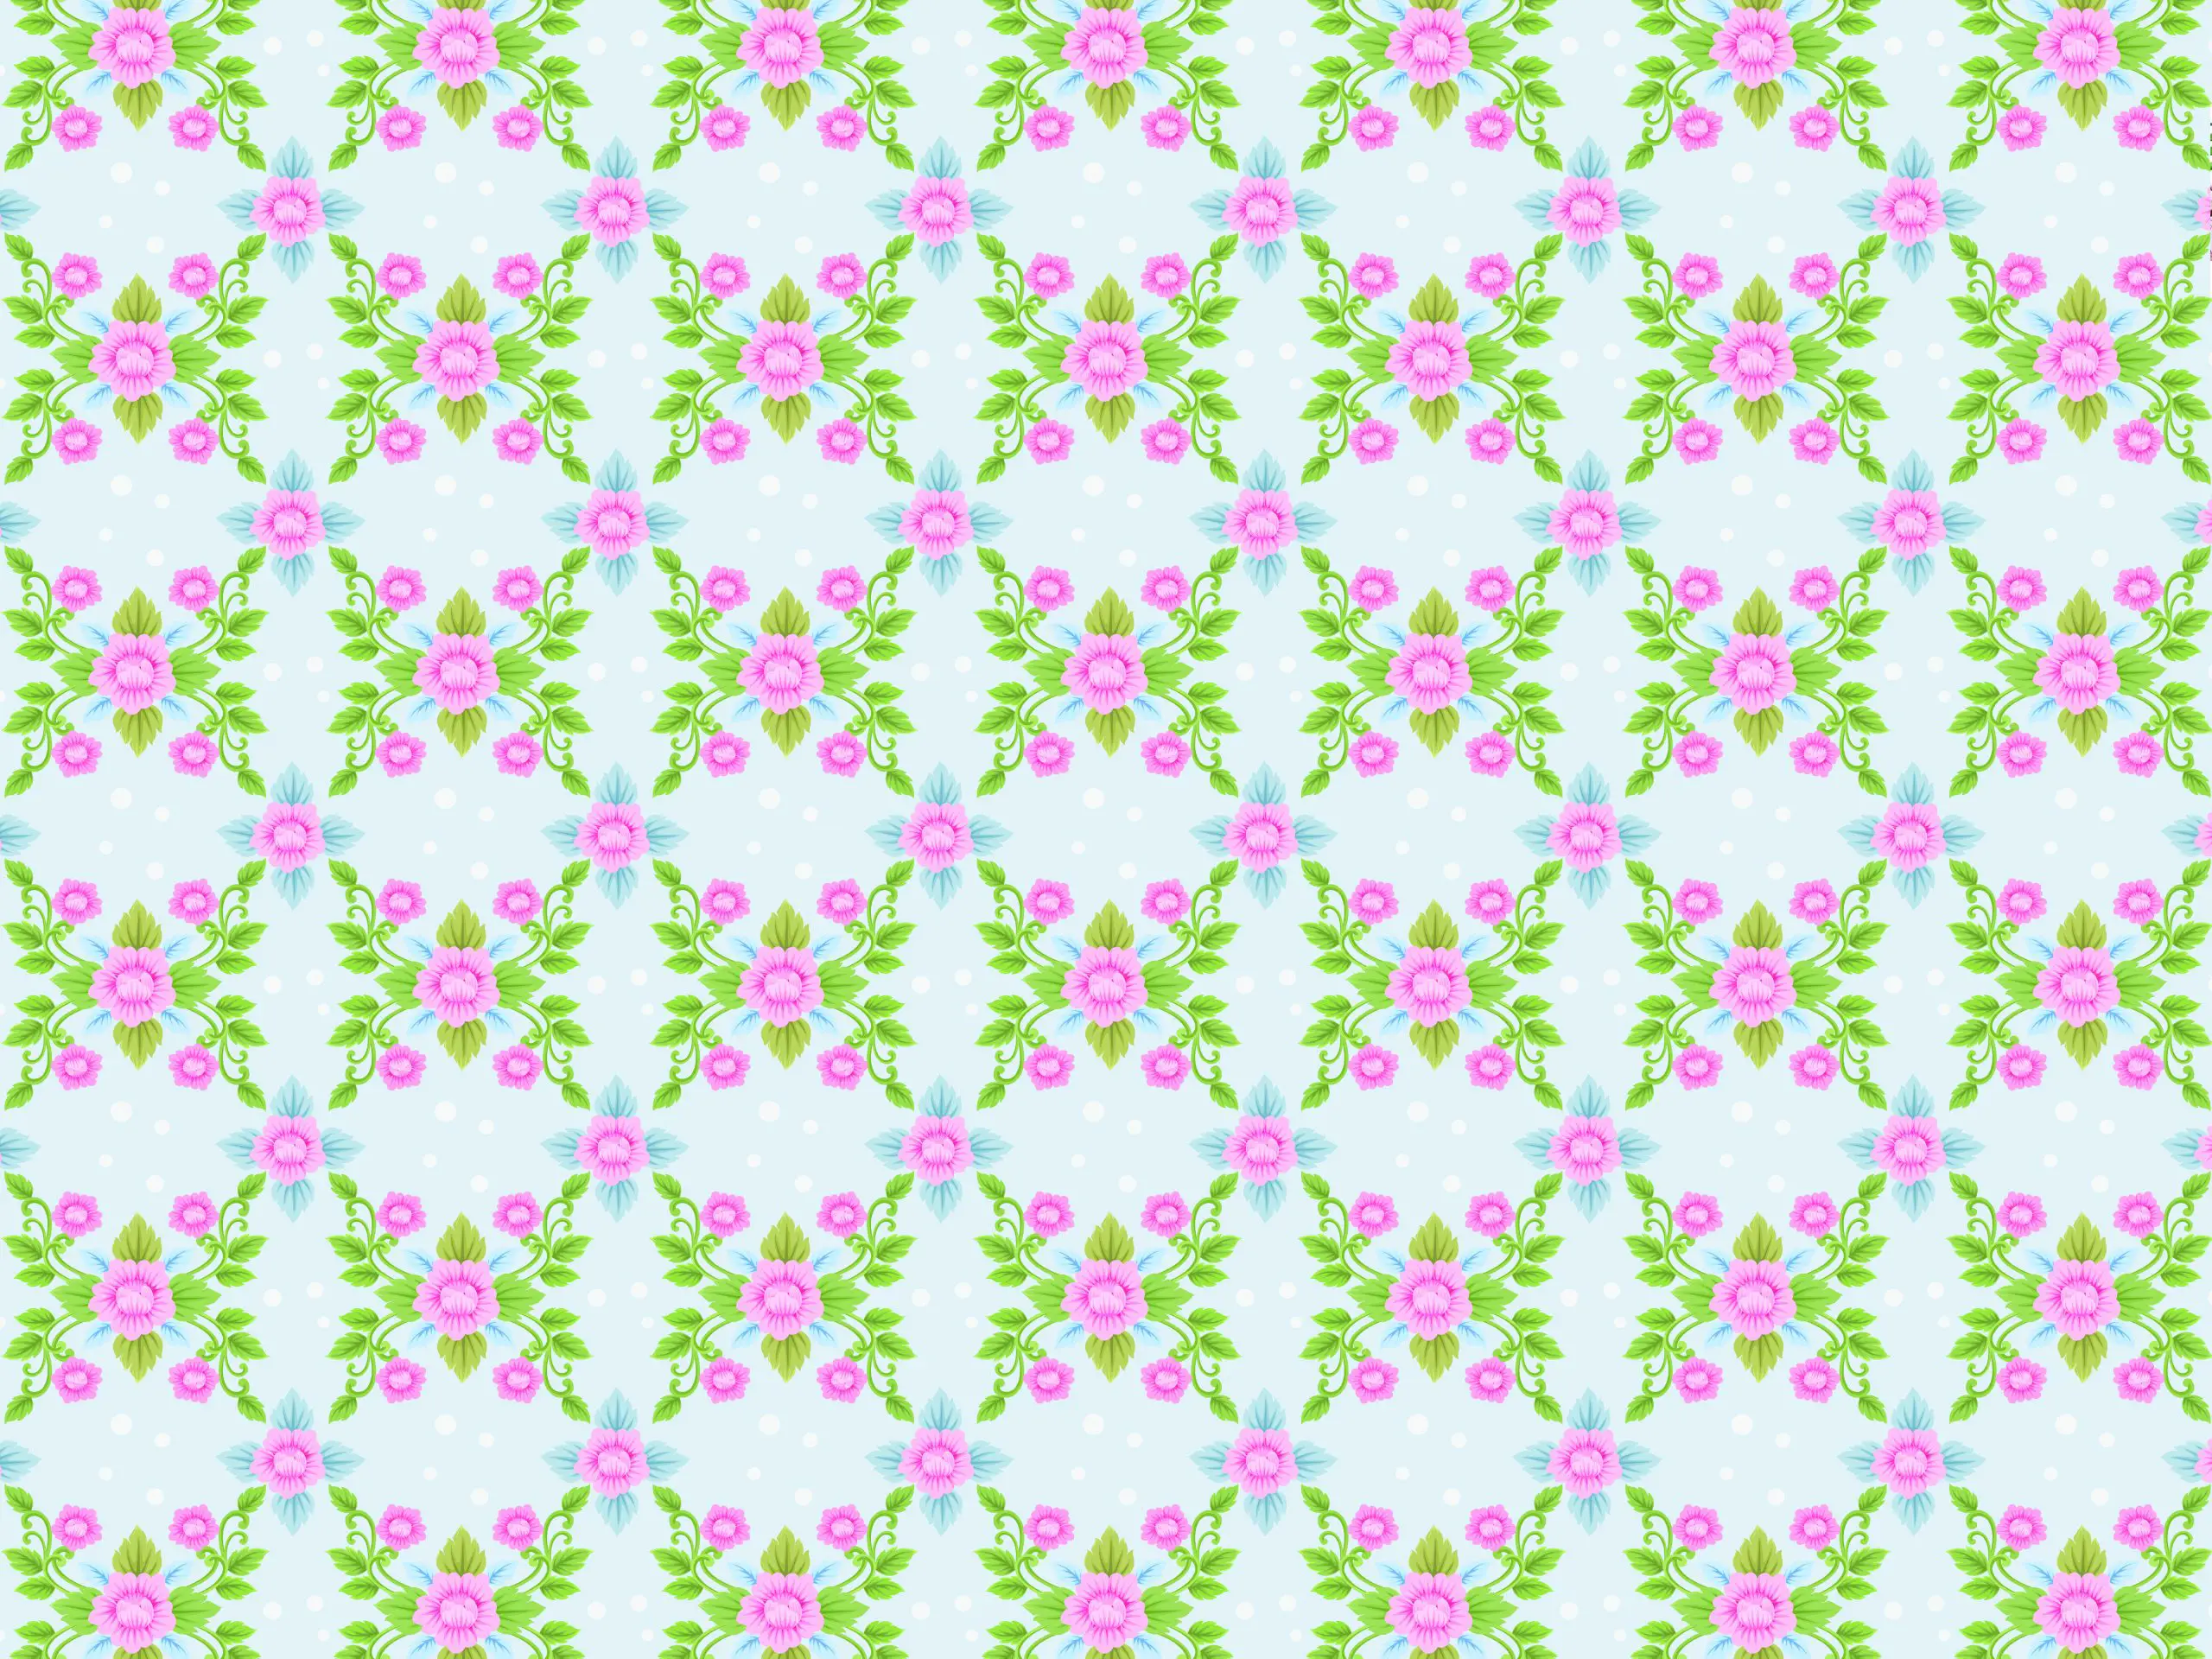 BRIGHT CUTE Blue Pink Flower Pattern 1920s Traditional Vintage Victorian Dollhouse Wallpaper Printable